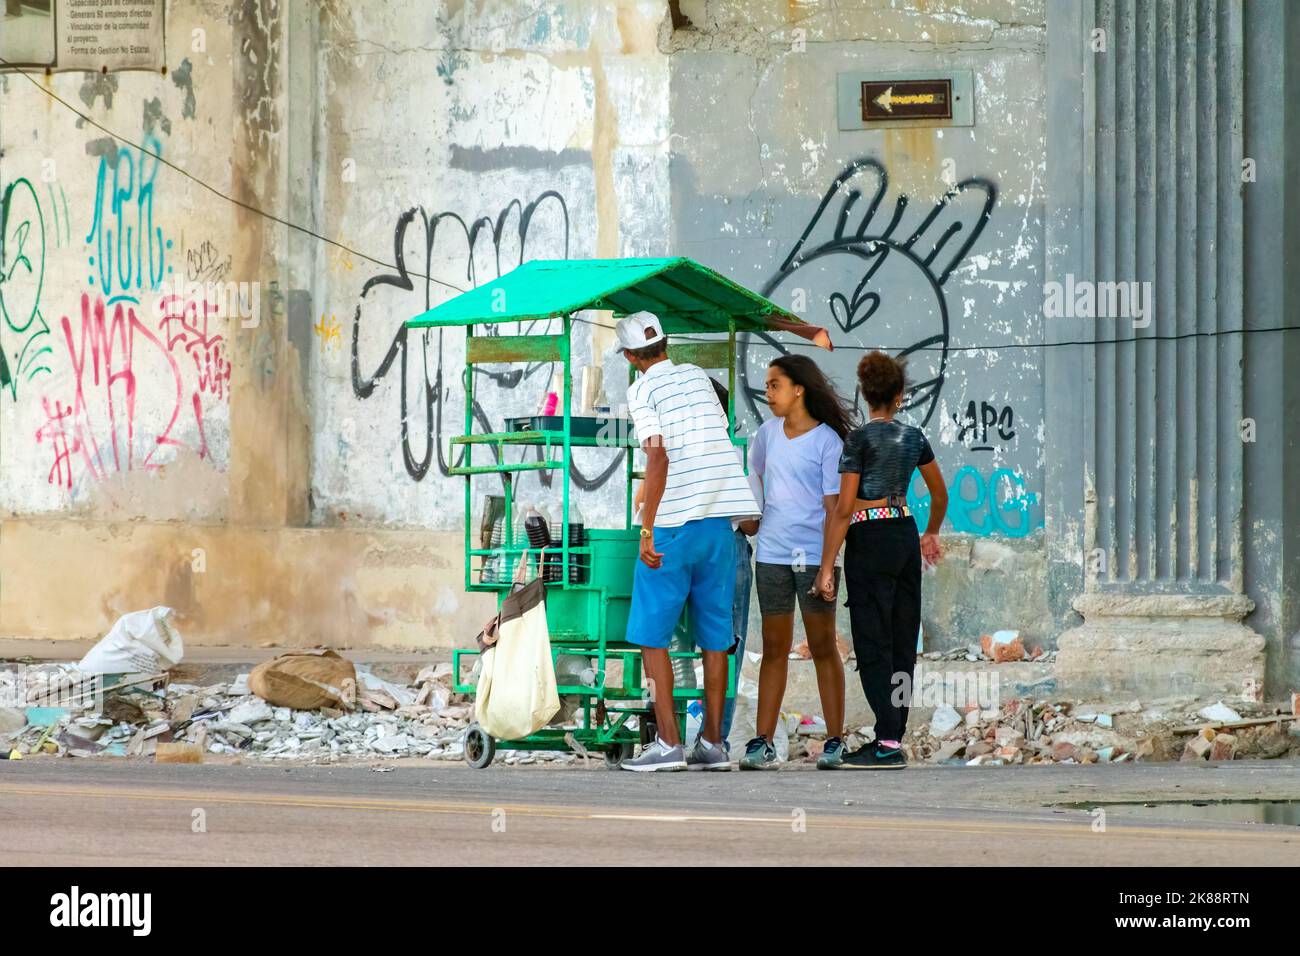 Two women buy flavored ice from a small business cart in a city street. Urban tagging graffiti is seen in the wall behind the people Stock Photo